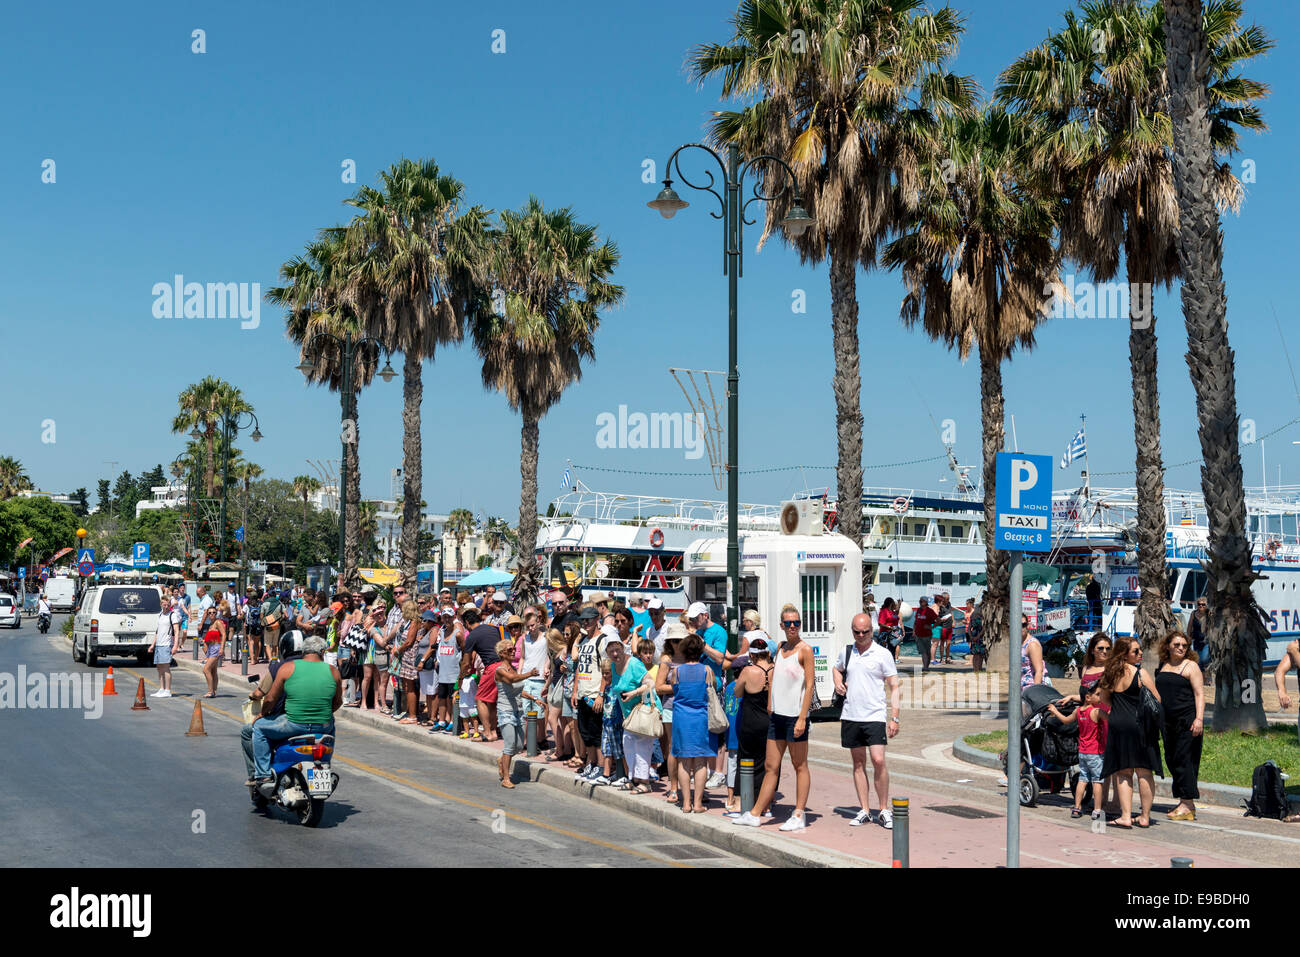 Tourists waiting for transport, Town of Kos, island of Kos, Greece Stock Photo